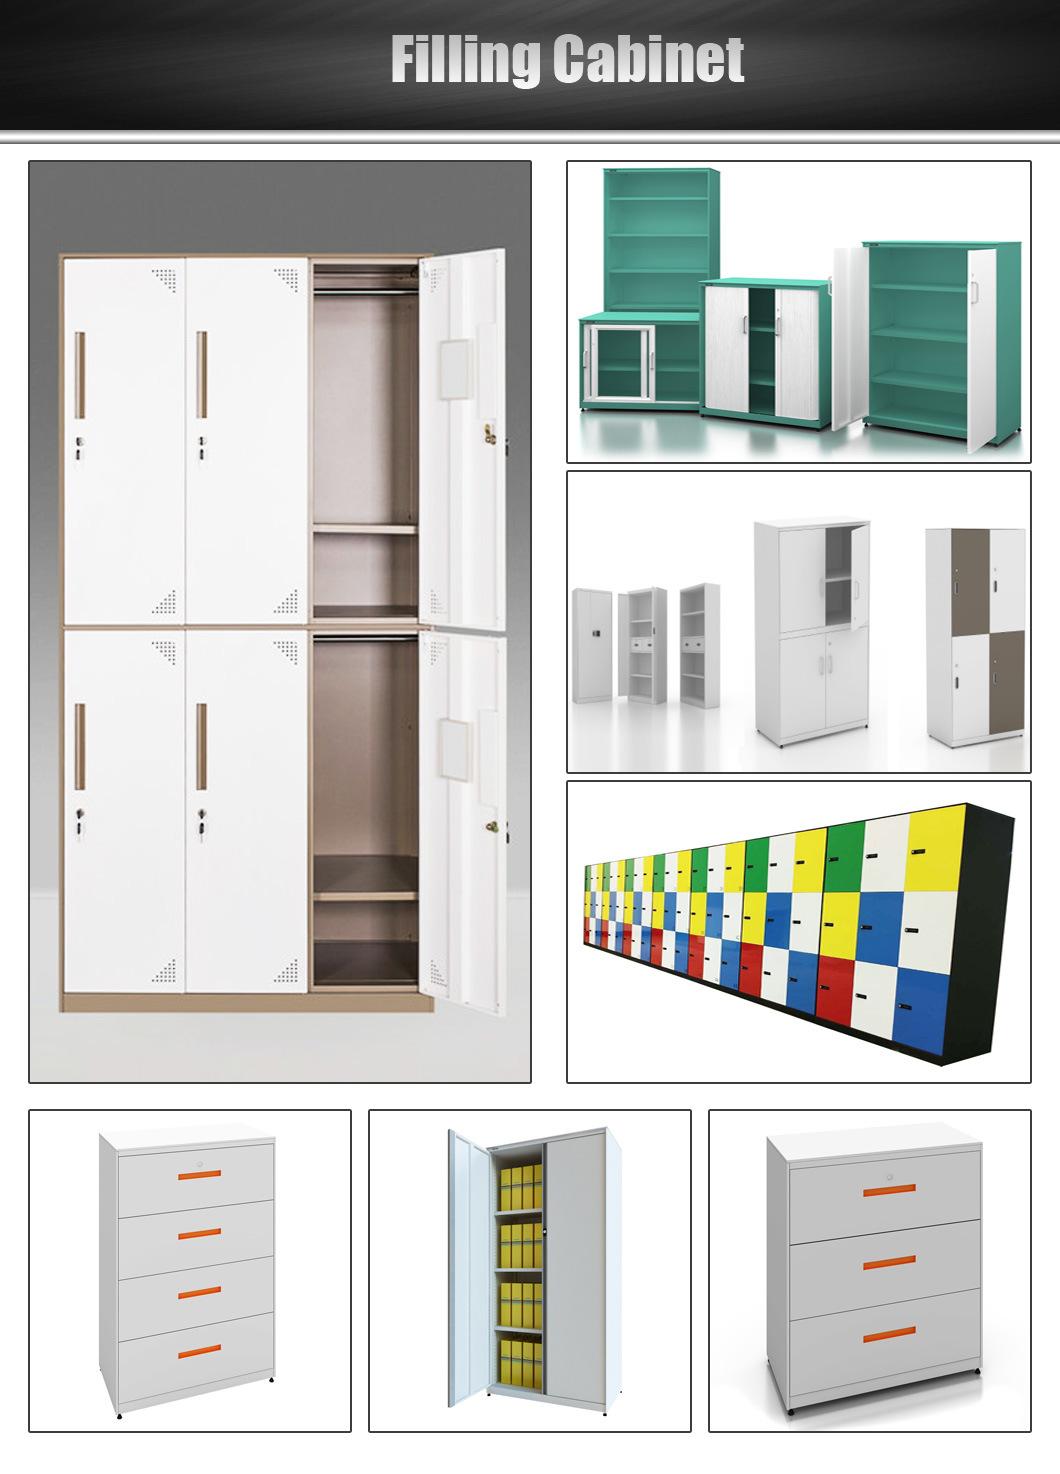 Sufficient Supply Work Storage Cabinets with Environmentally-Friendly Materials